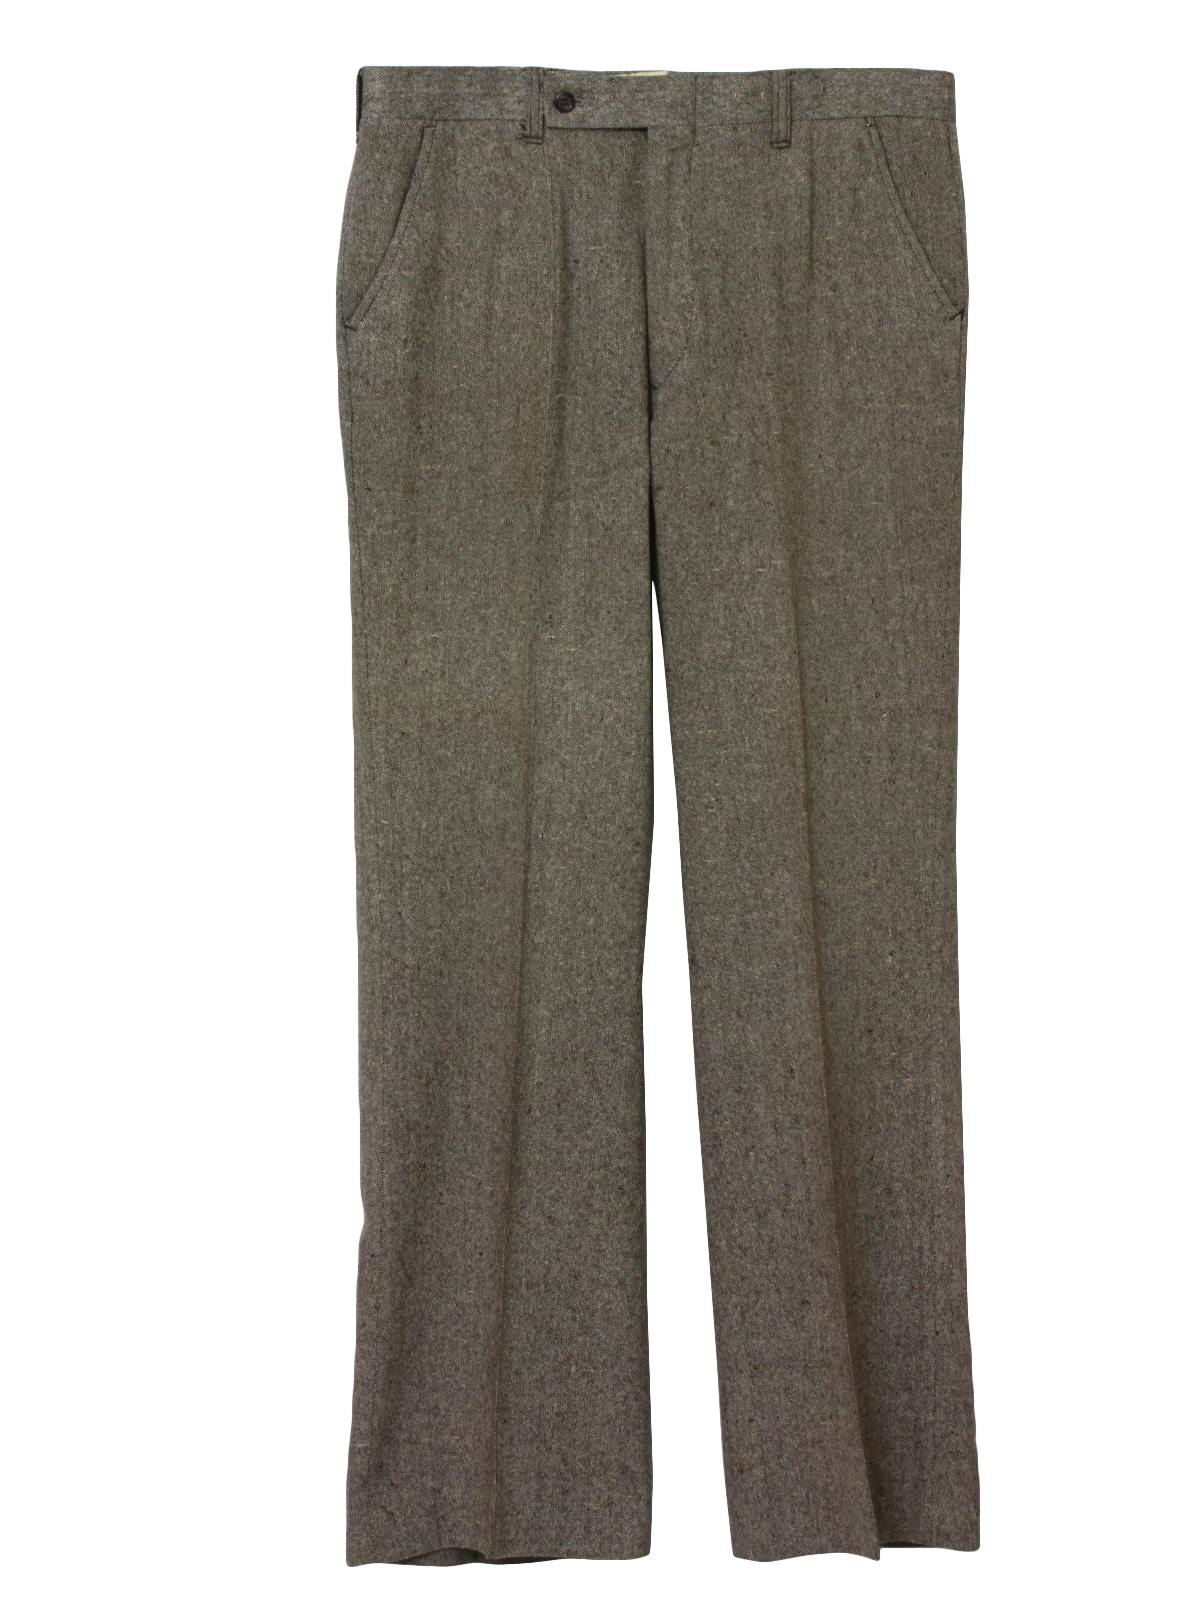 Vintage Made in Korea 1970s Flared Pants / Flares: 70s -Made in Korea ...